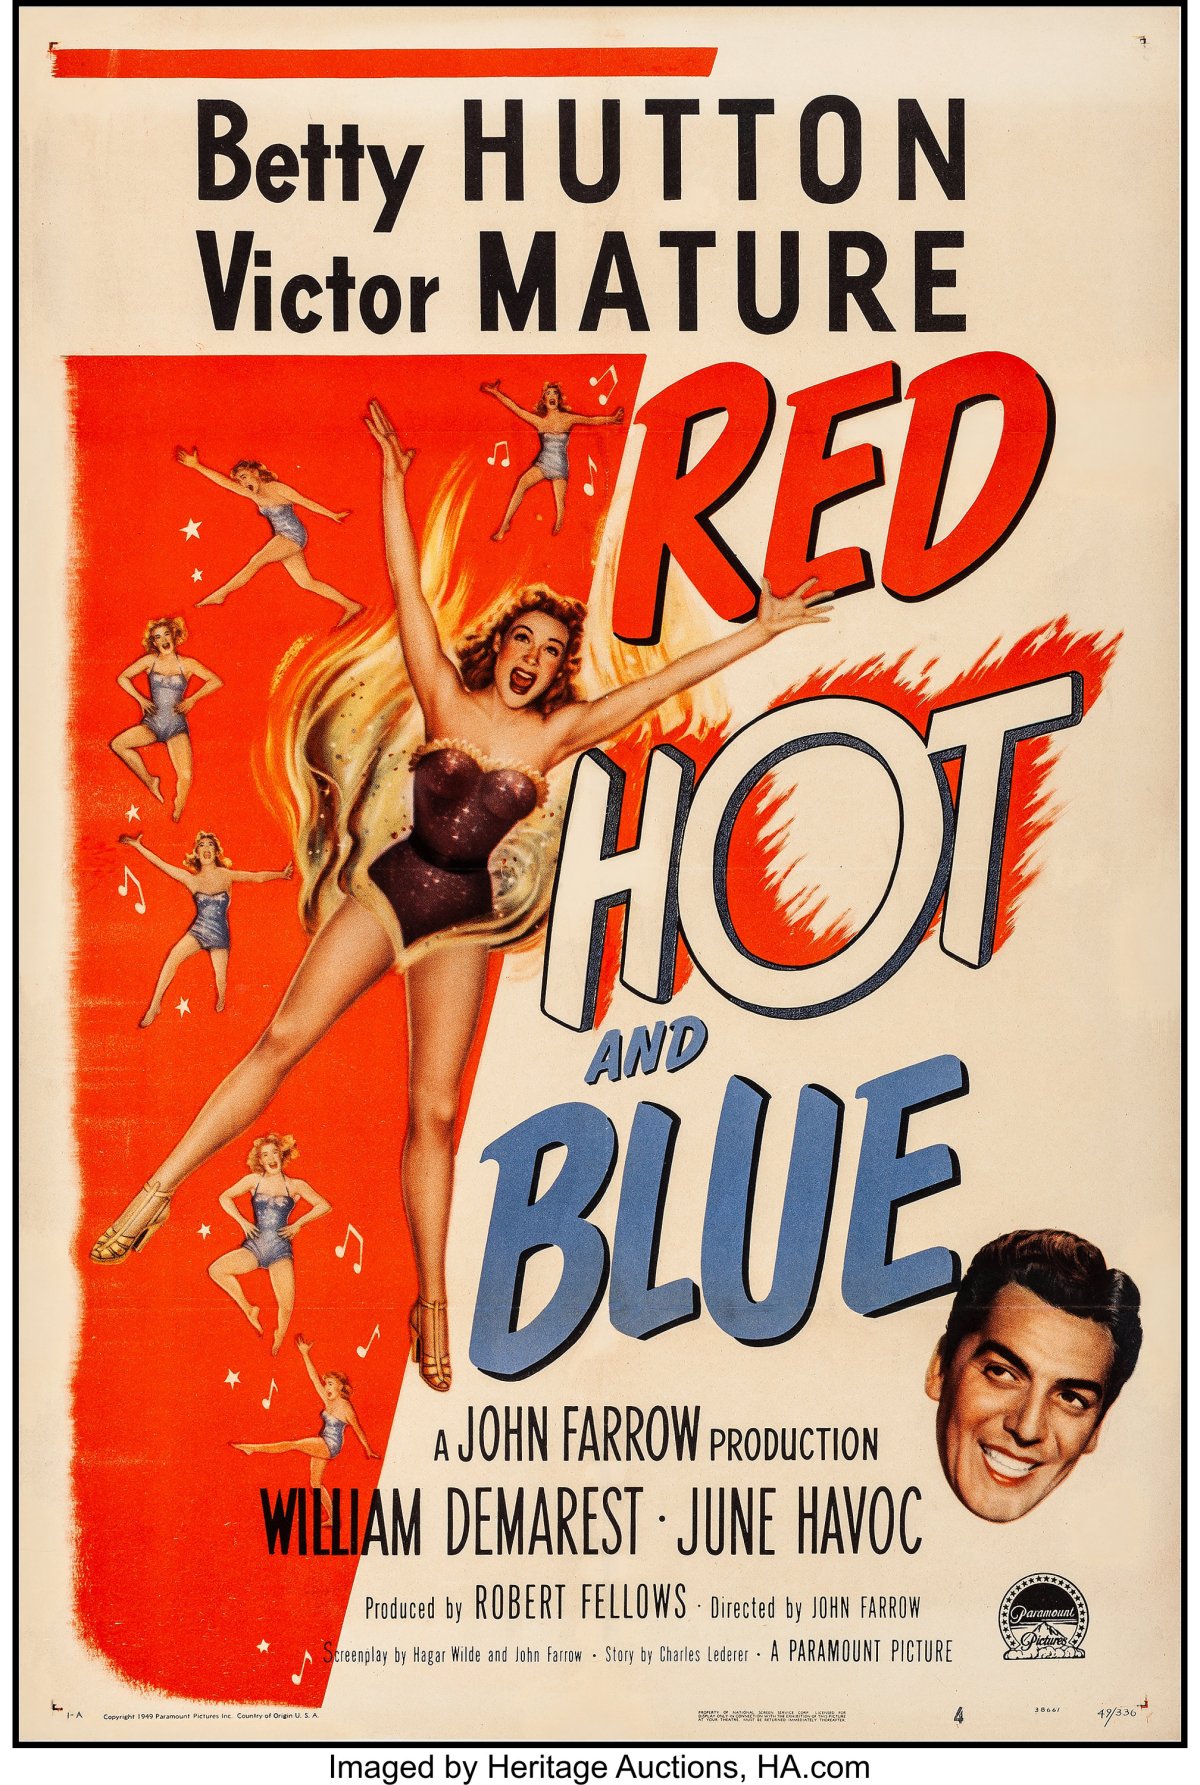 VIDEO: Pepito’s Filmography: “Red, Hot and Blue” Starring Betty Hutton & Victor Mature (1949)